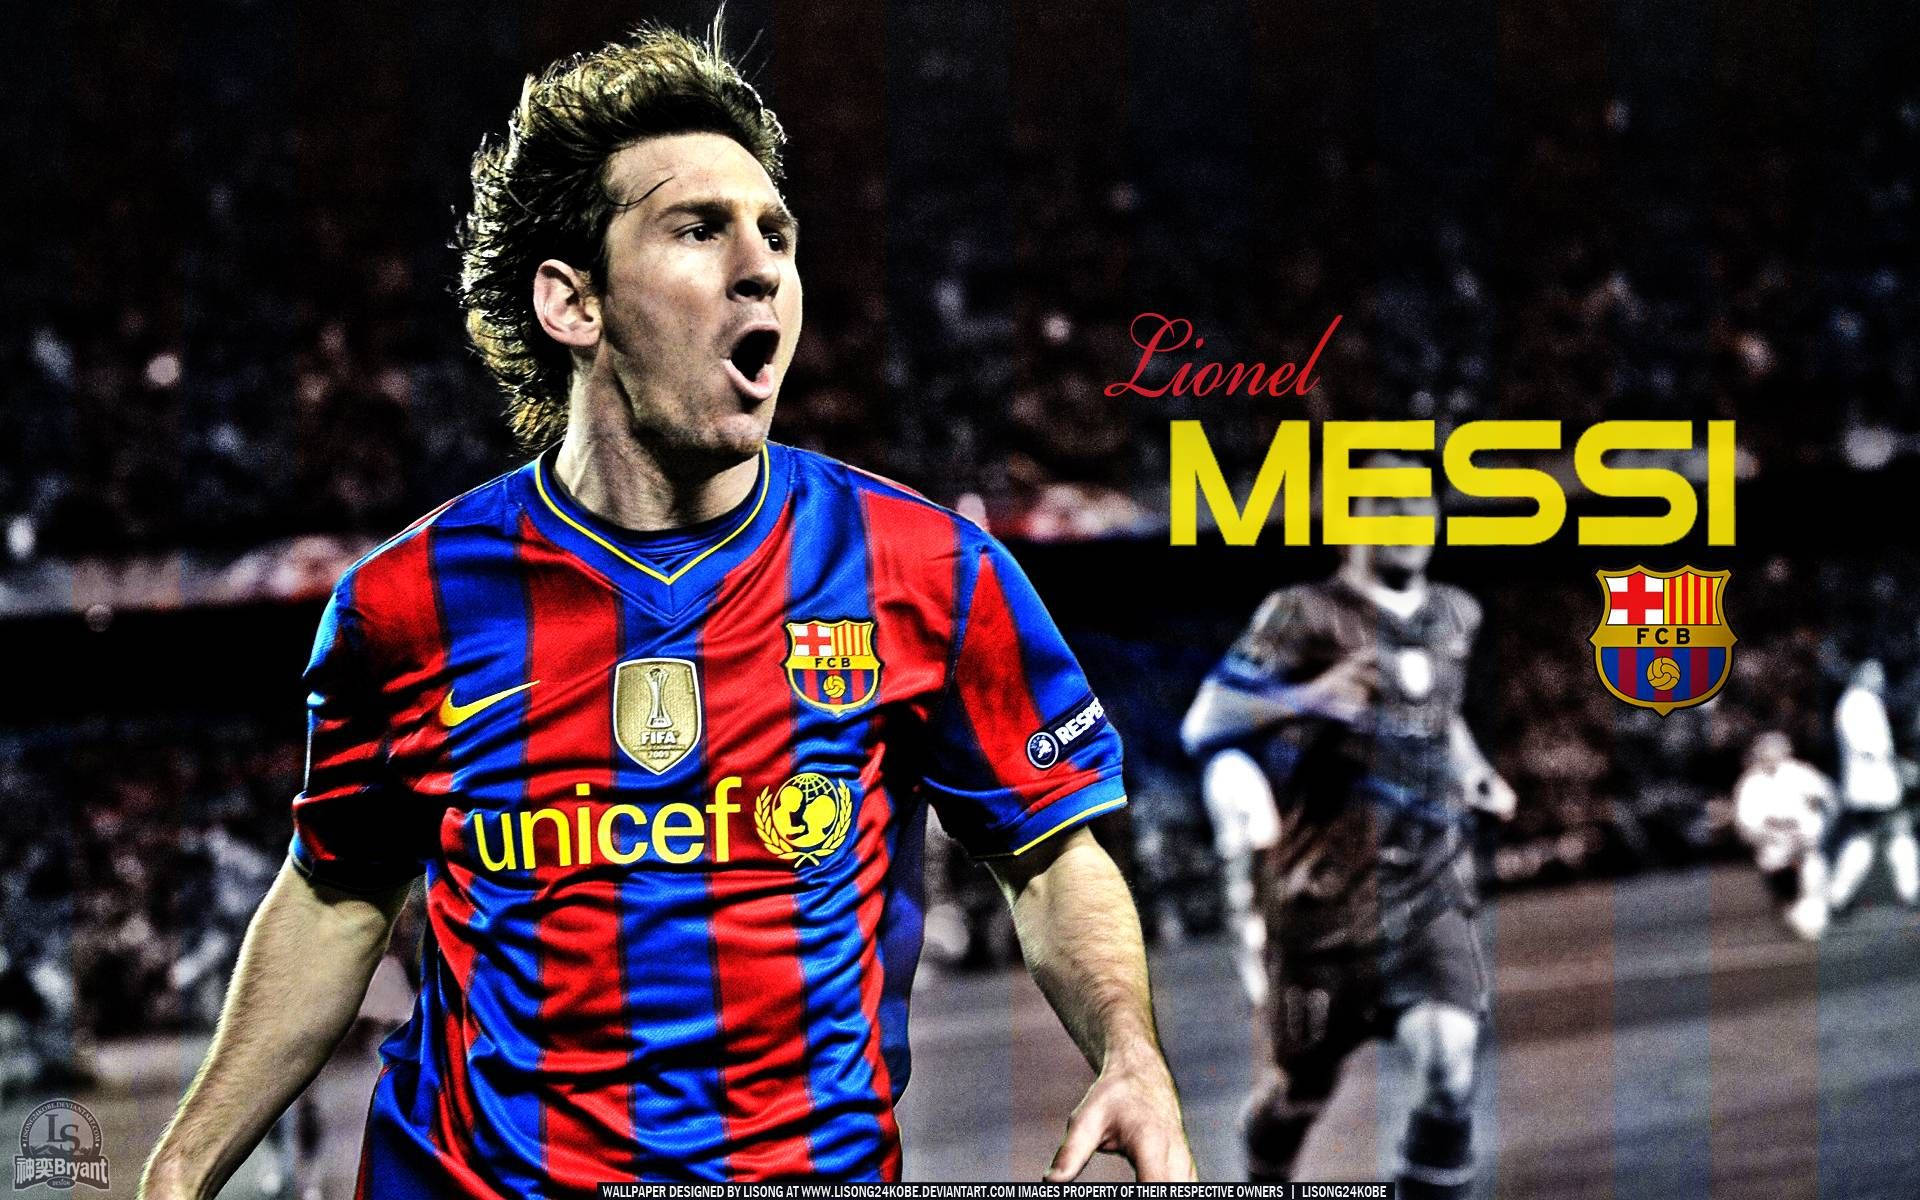 Free Messi Wallpaper Downloads, [200+] Messi Wallpapers for FREE |  